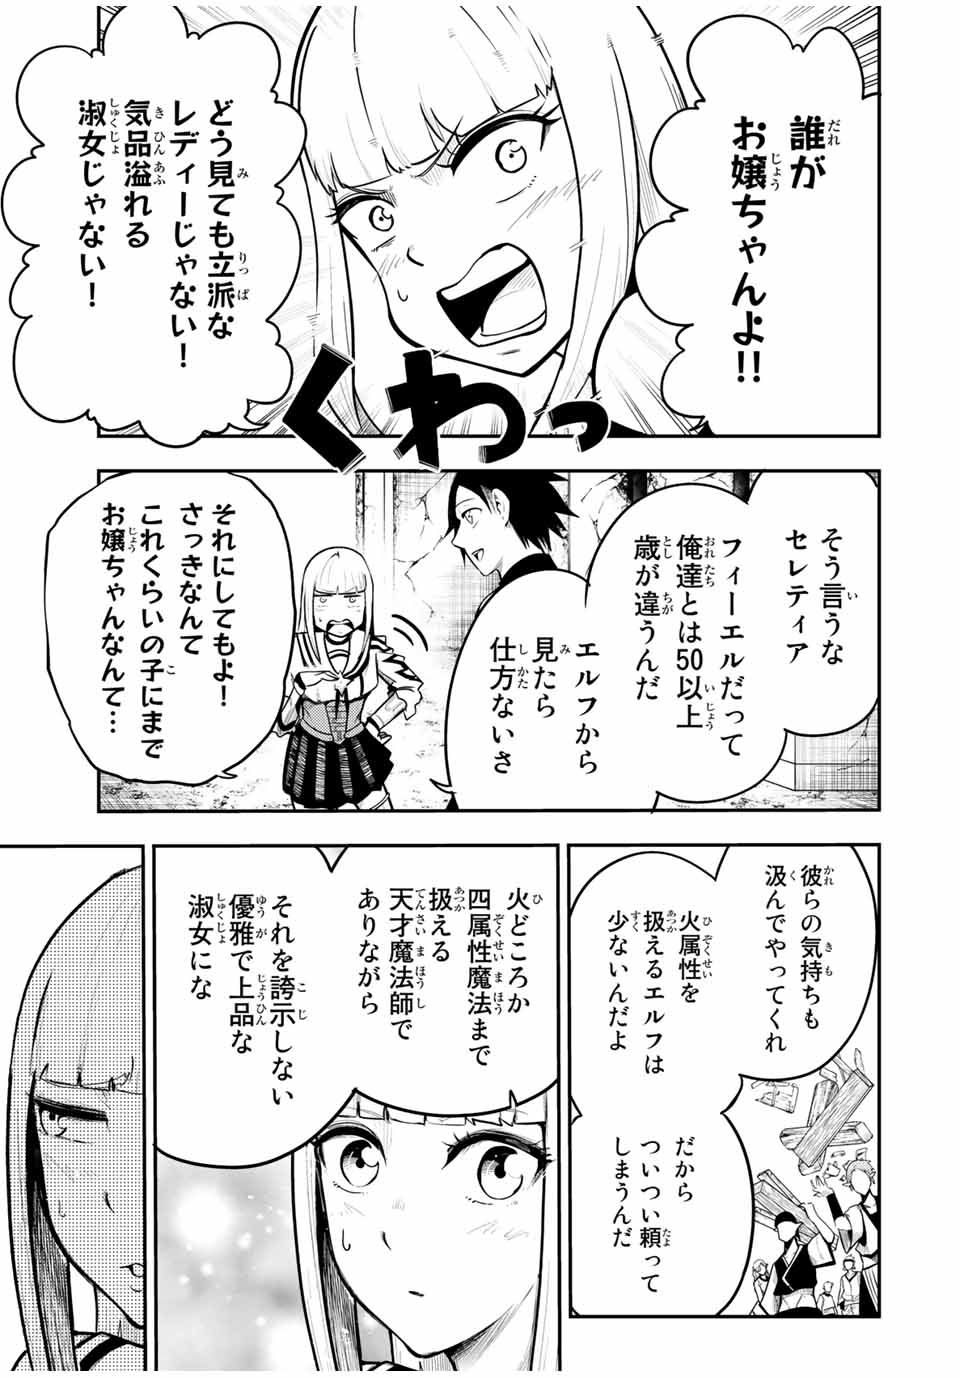 the strongest former prince-; 奴隷転生 ～その奴隷、最強の元王子につき～ 第50話 - Page 11